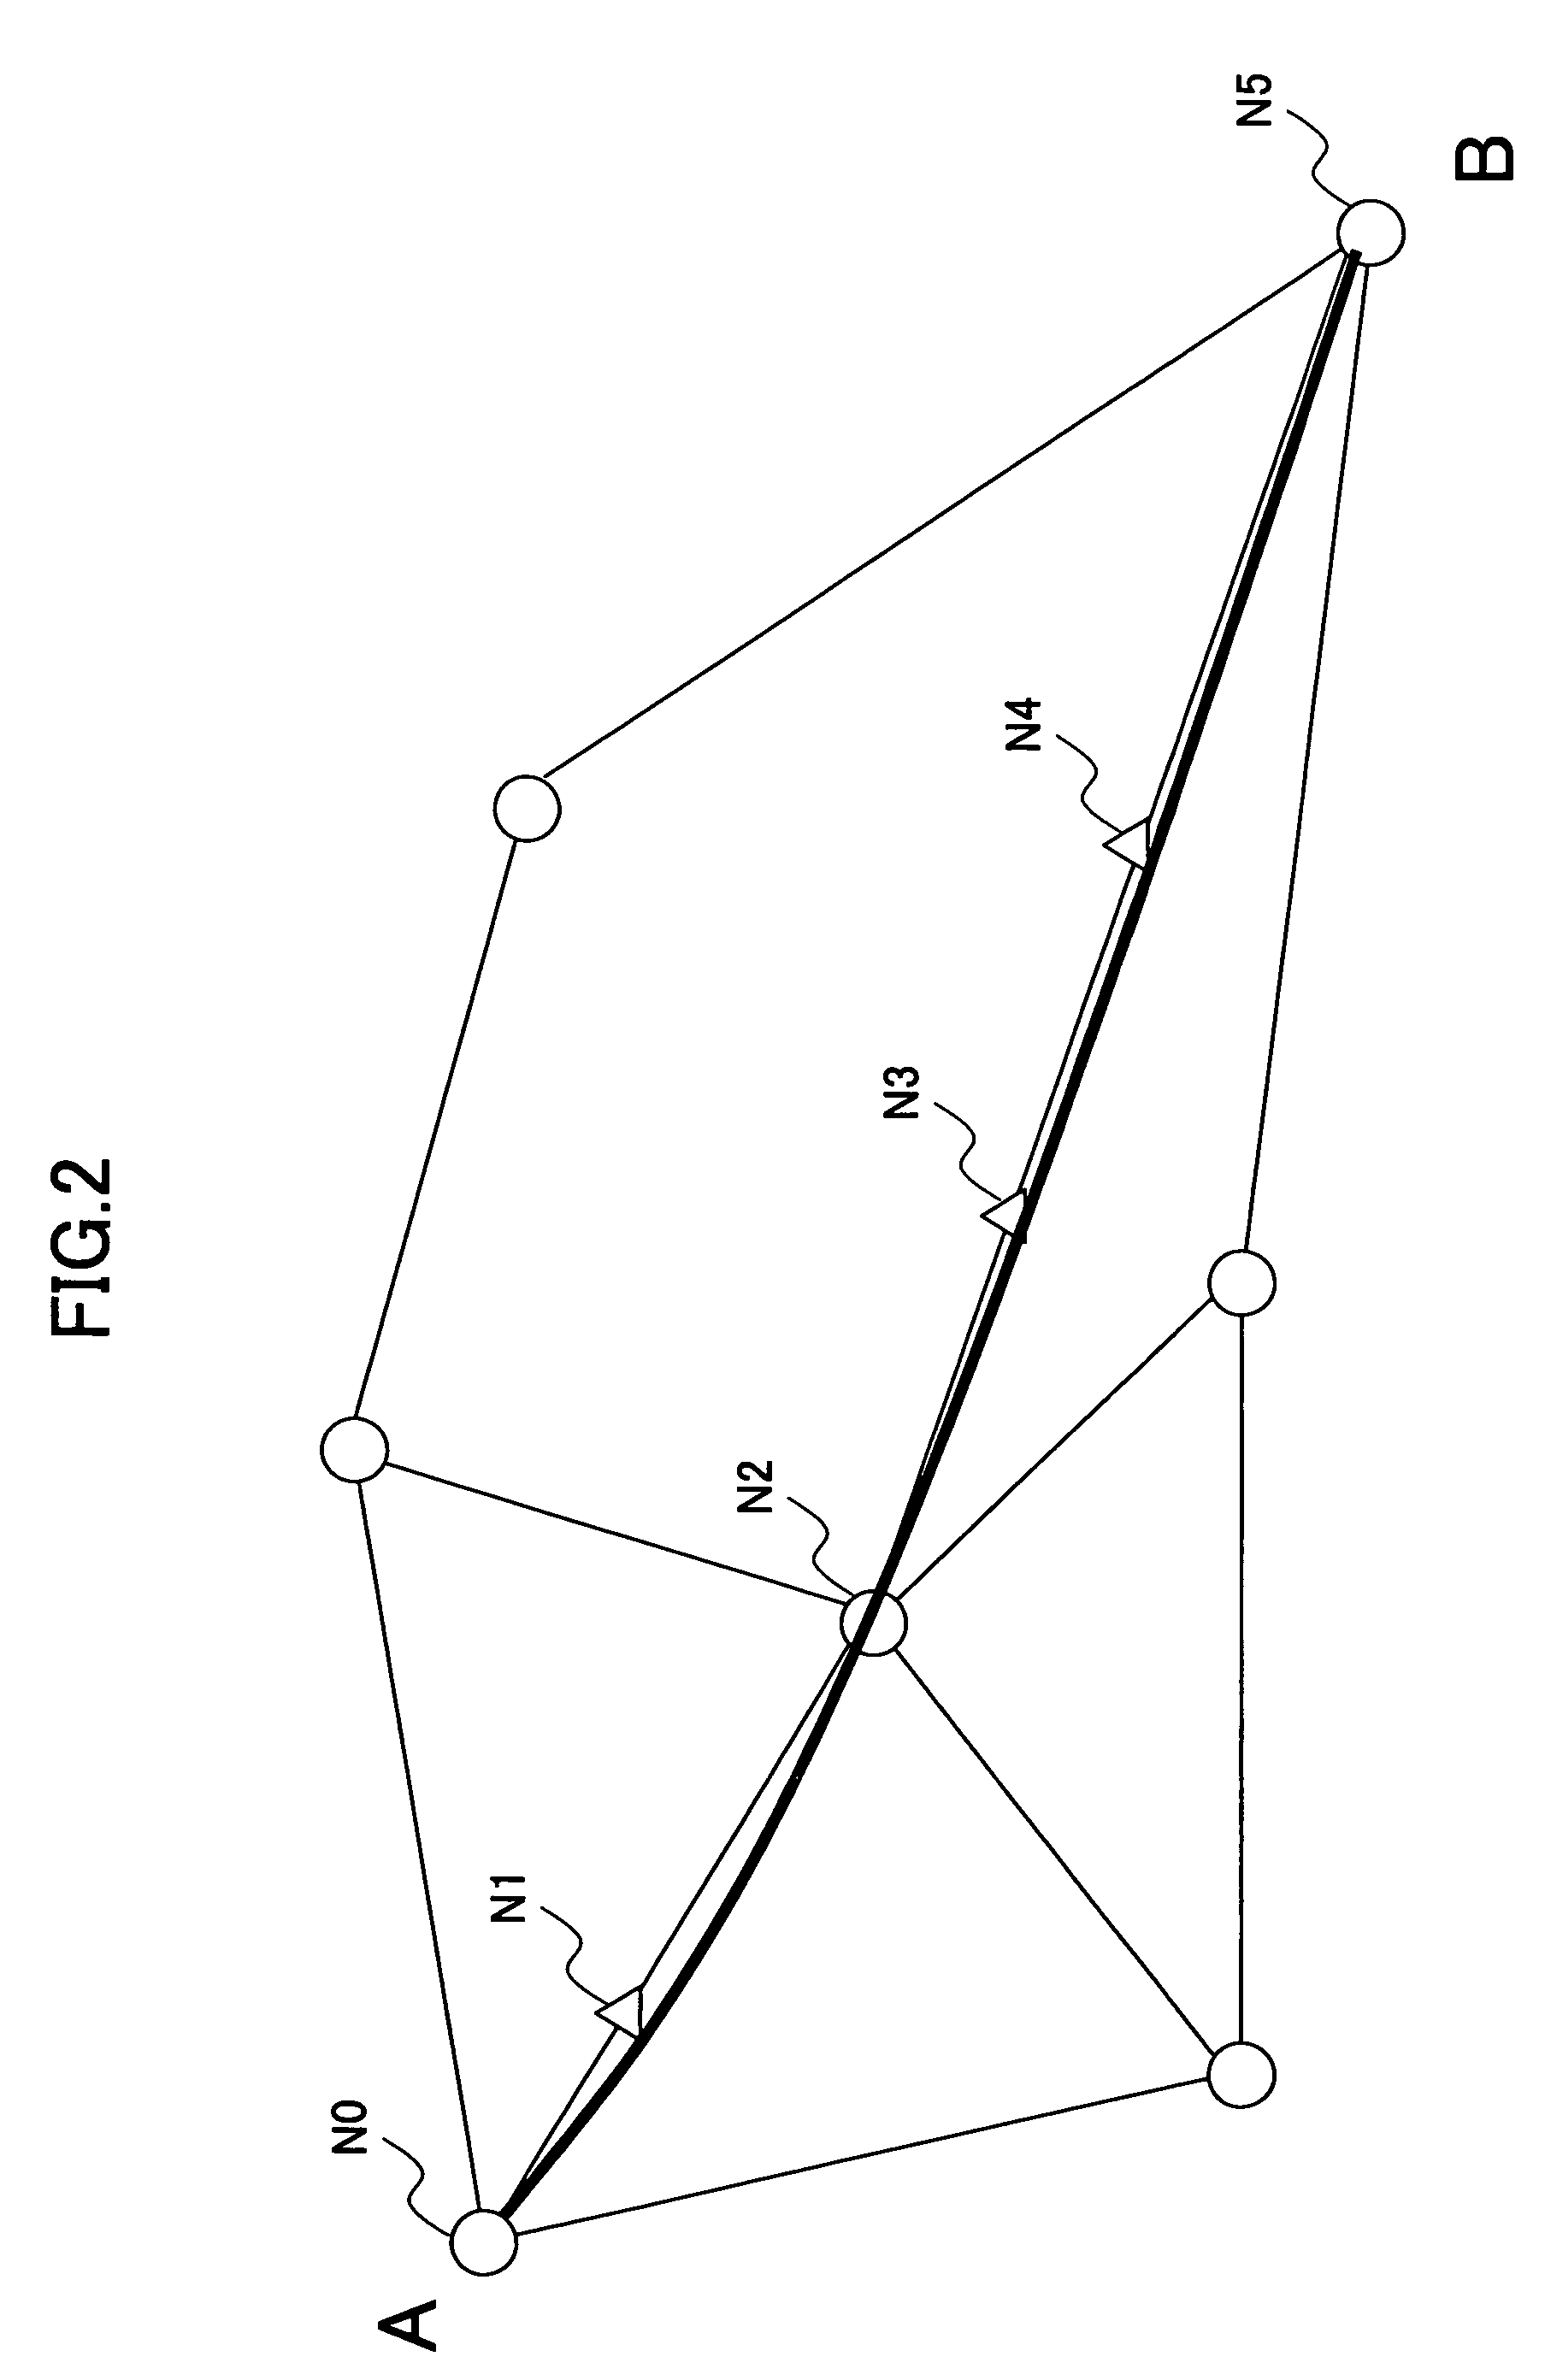 Wavelength dispersion compensation design method and a system thereof